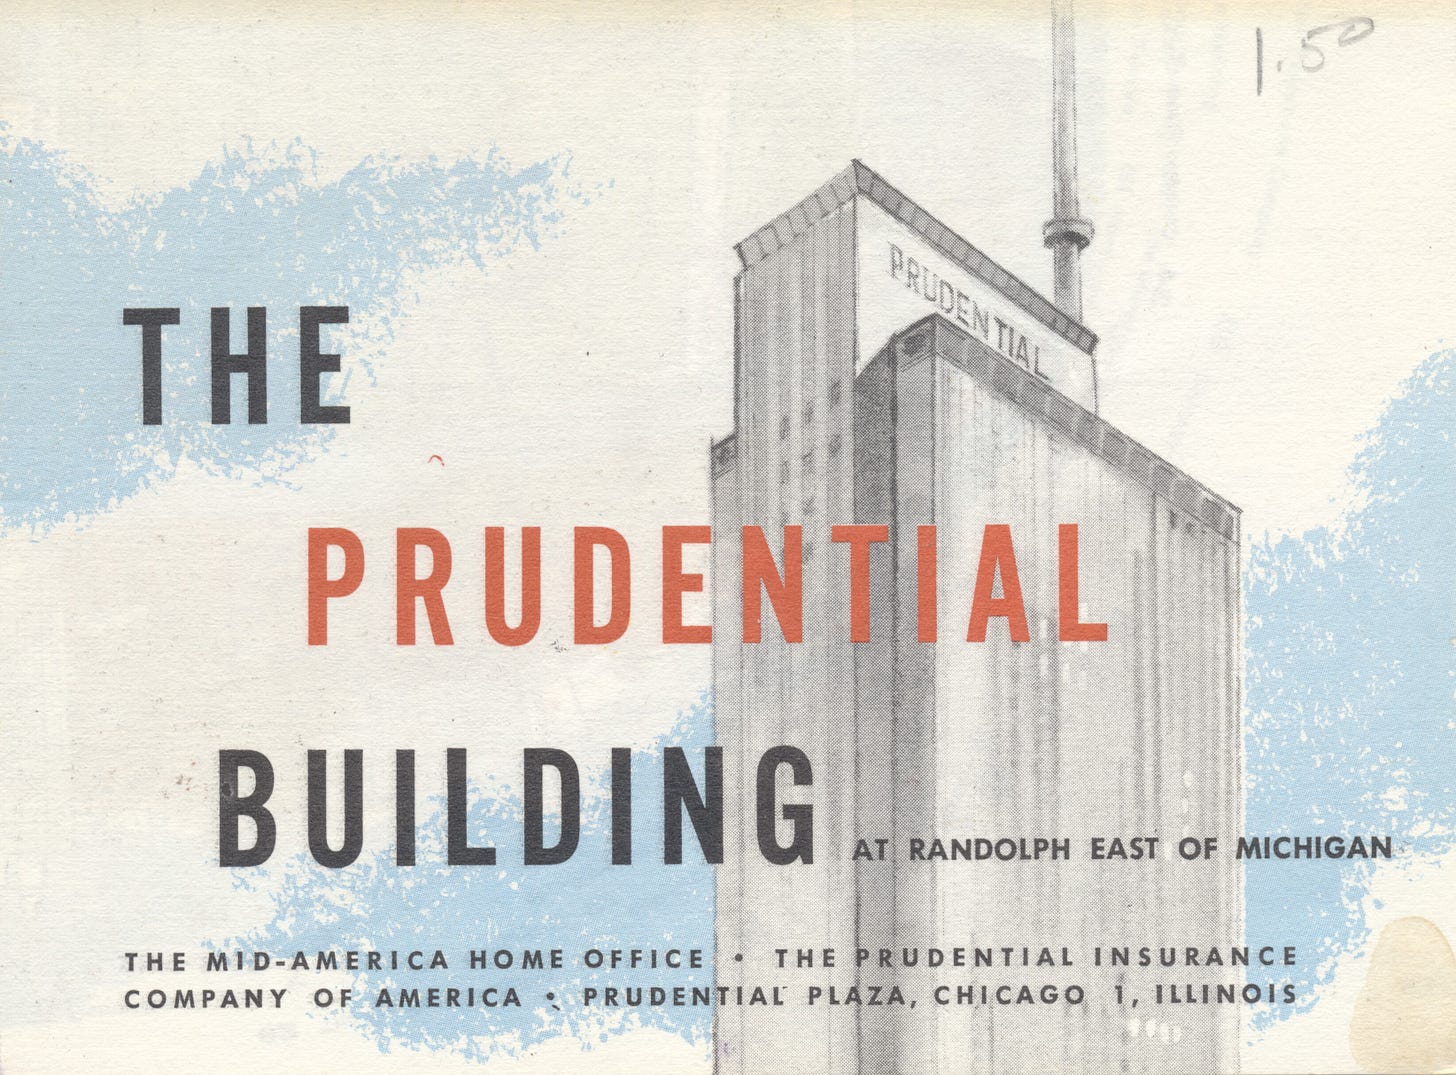 IL, Chicago - The Prudential Building - Chicago, Illinois (1)